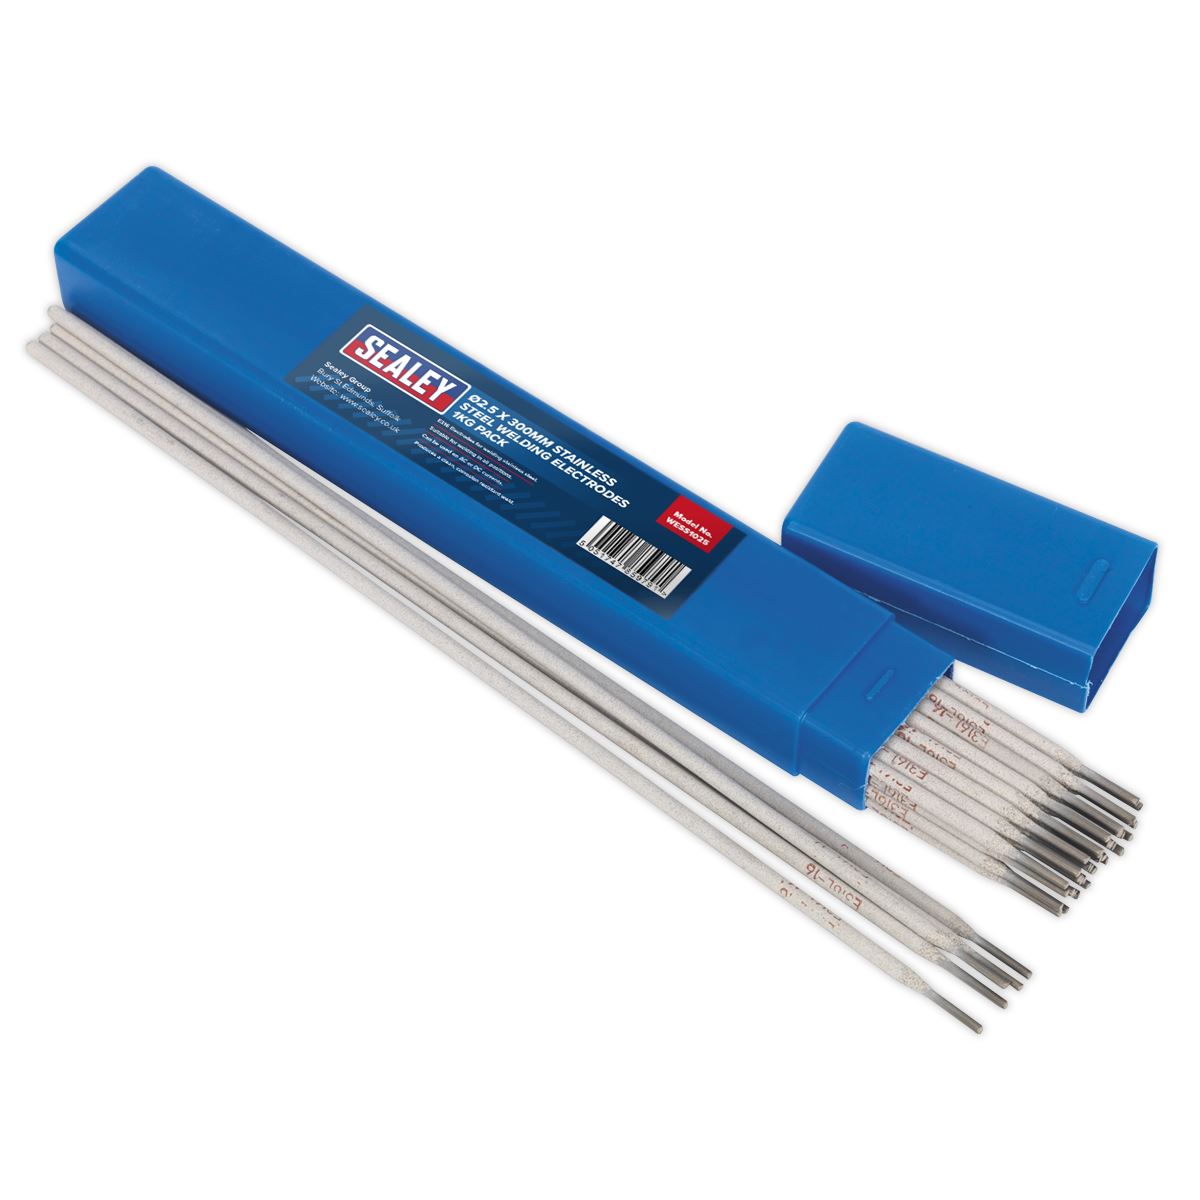 Sealey Welding Electrodes Stainless Steel Ø2.5 x 300mm 1kg Pack